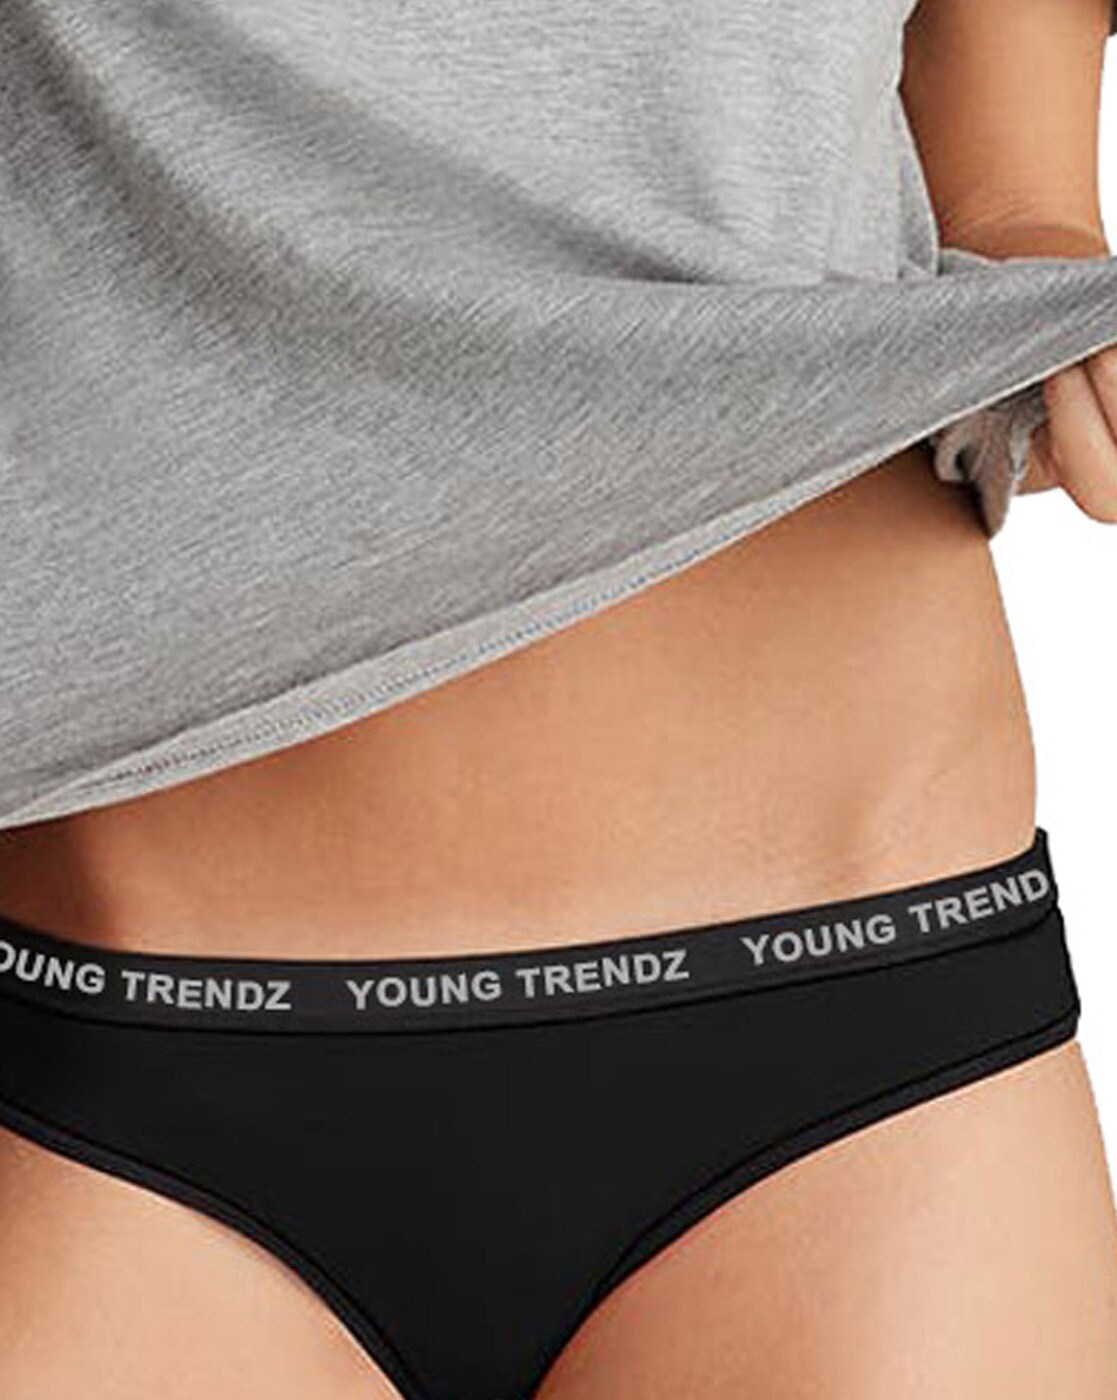 Buy Panty High Waist Women's by YoungTrendz